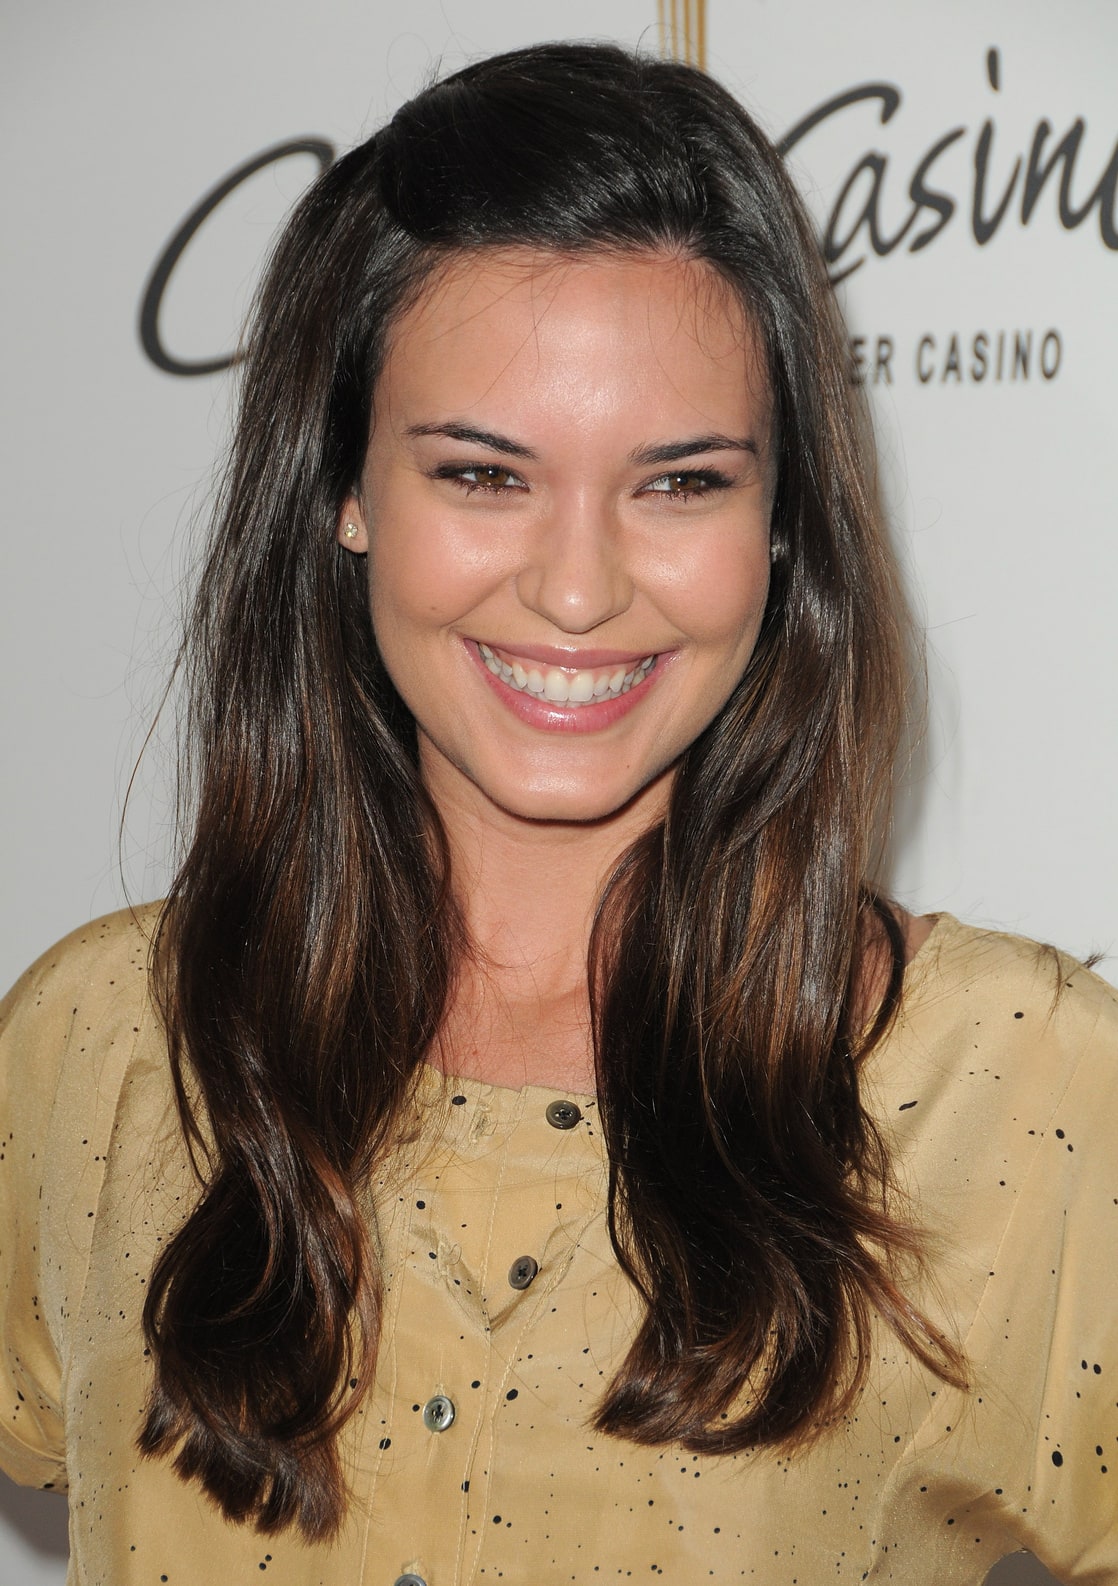 Odette-Annable-an-American-actress